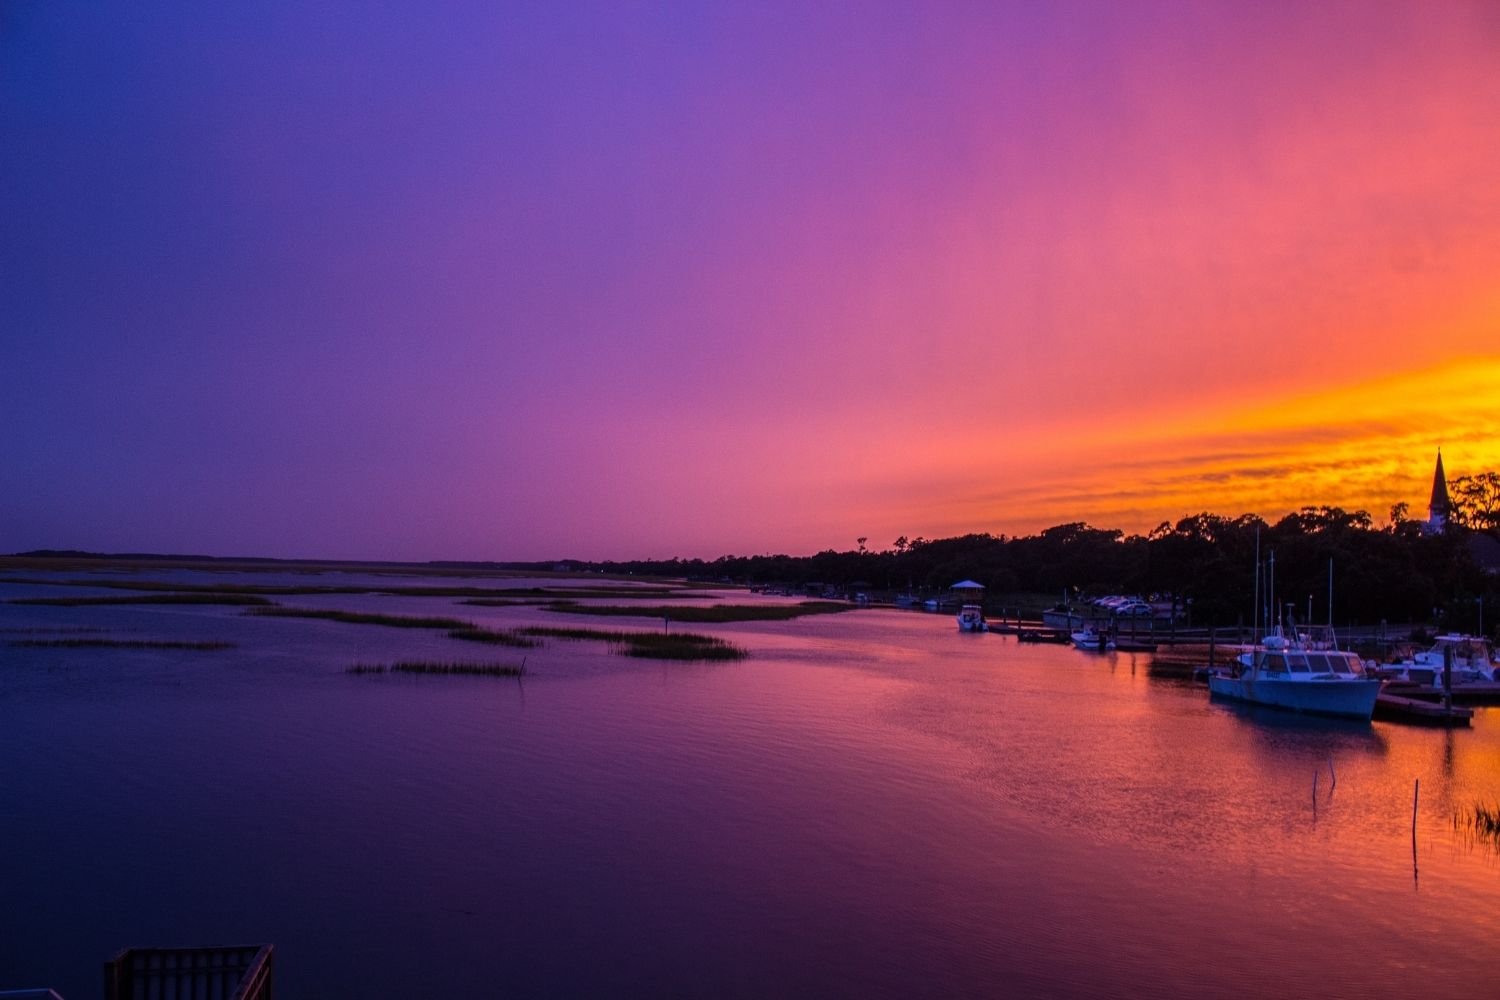 things to do in murrells inlet